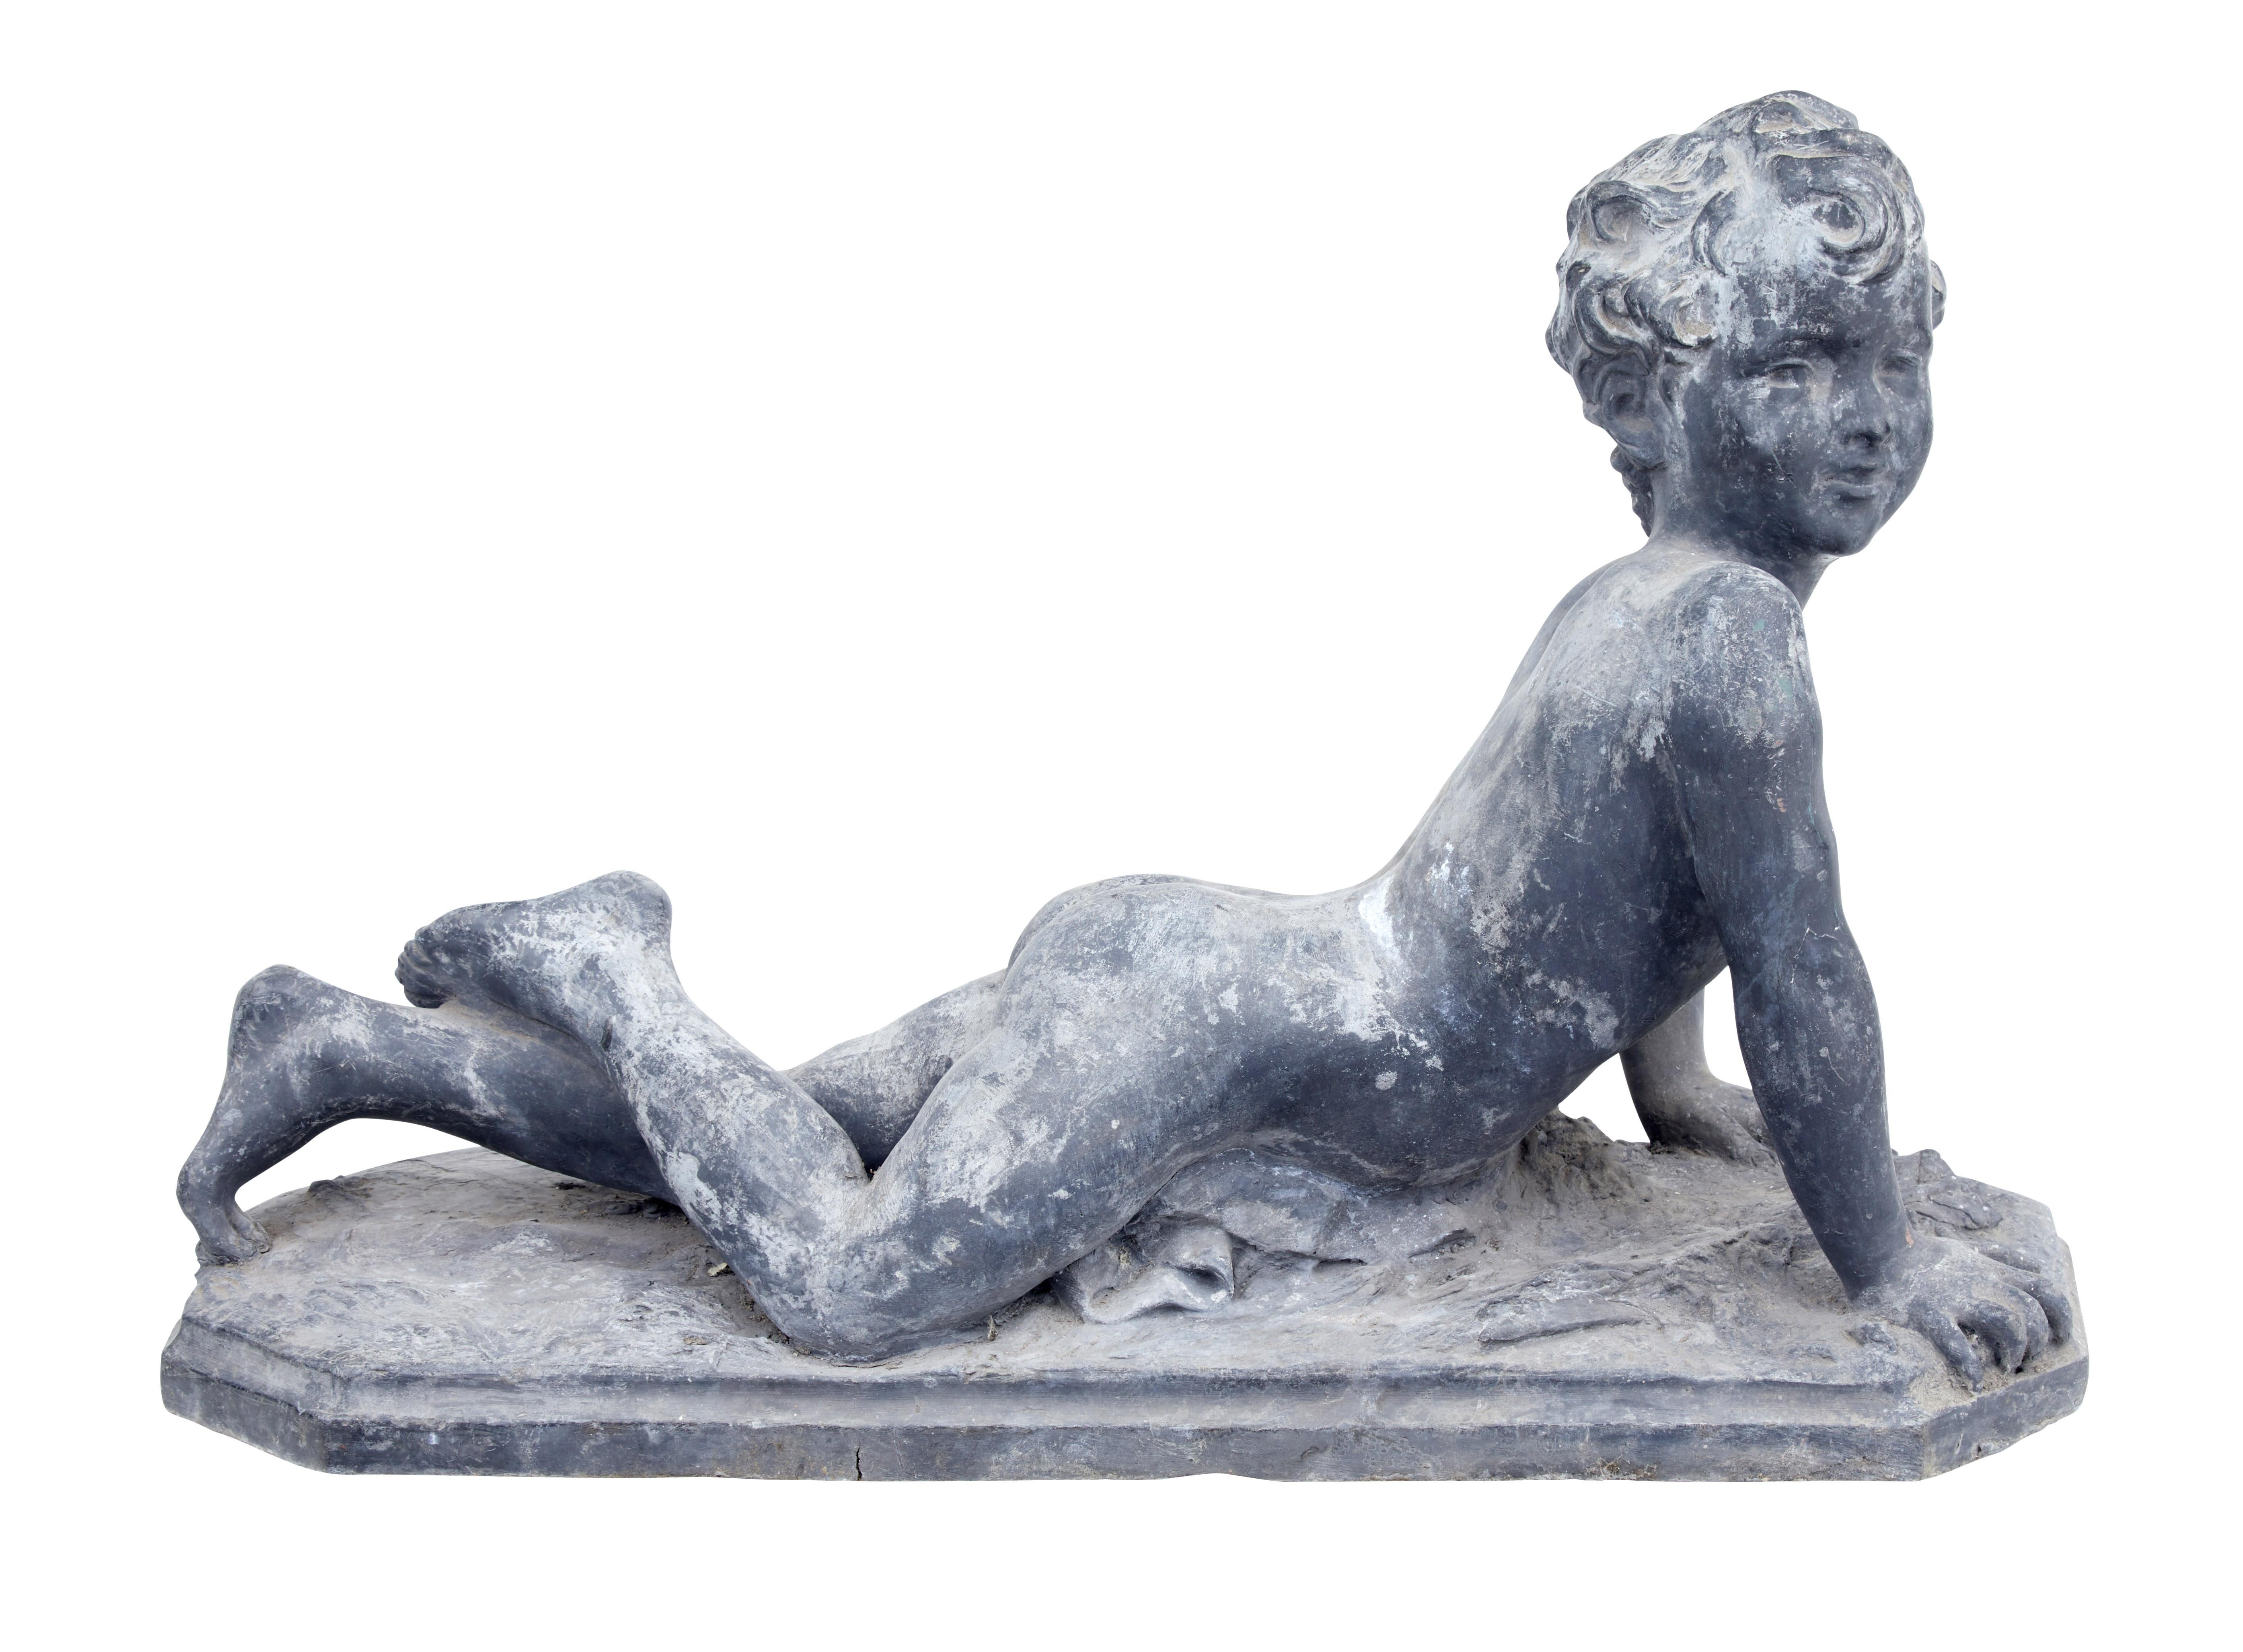 Good quality lead cherub circa 1900.

Ideal for use as a feature in the home or the garden. Good original color and patina.

Expected surface marks and minor losses to plinth base.